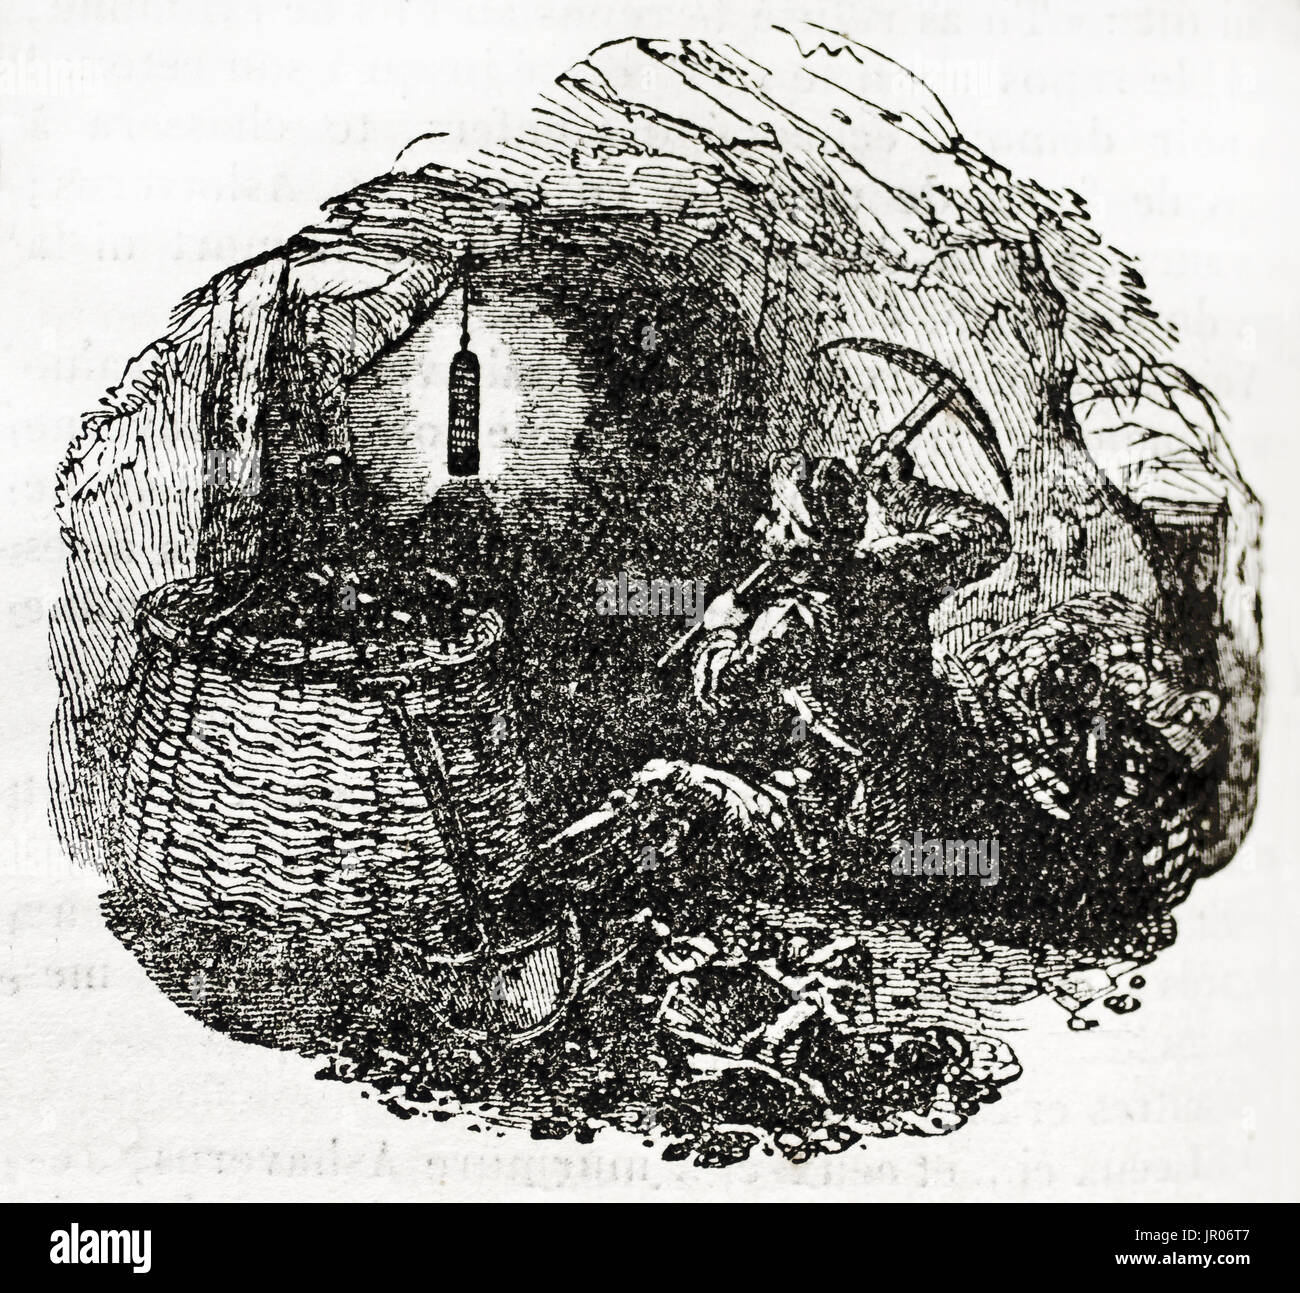 Old illustration of Davy lamp in a mine. By unidentified author, published on Magasin Pittoresque, Paris, 1833. Stock Photo